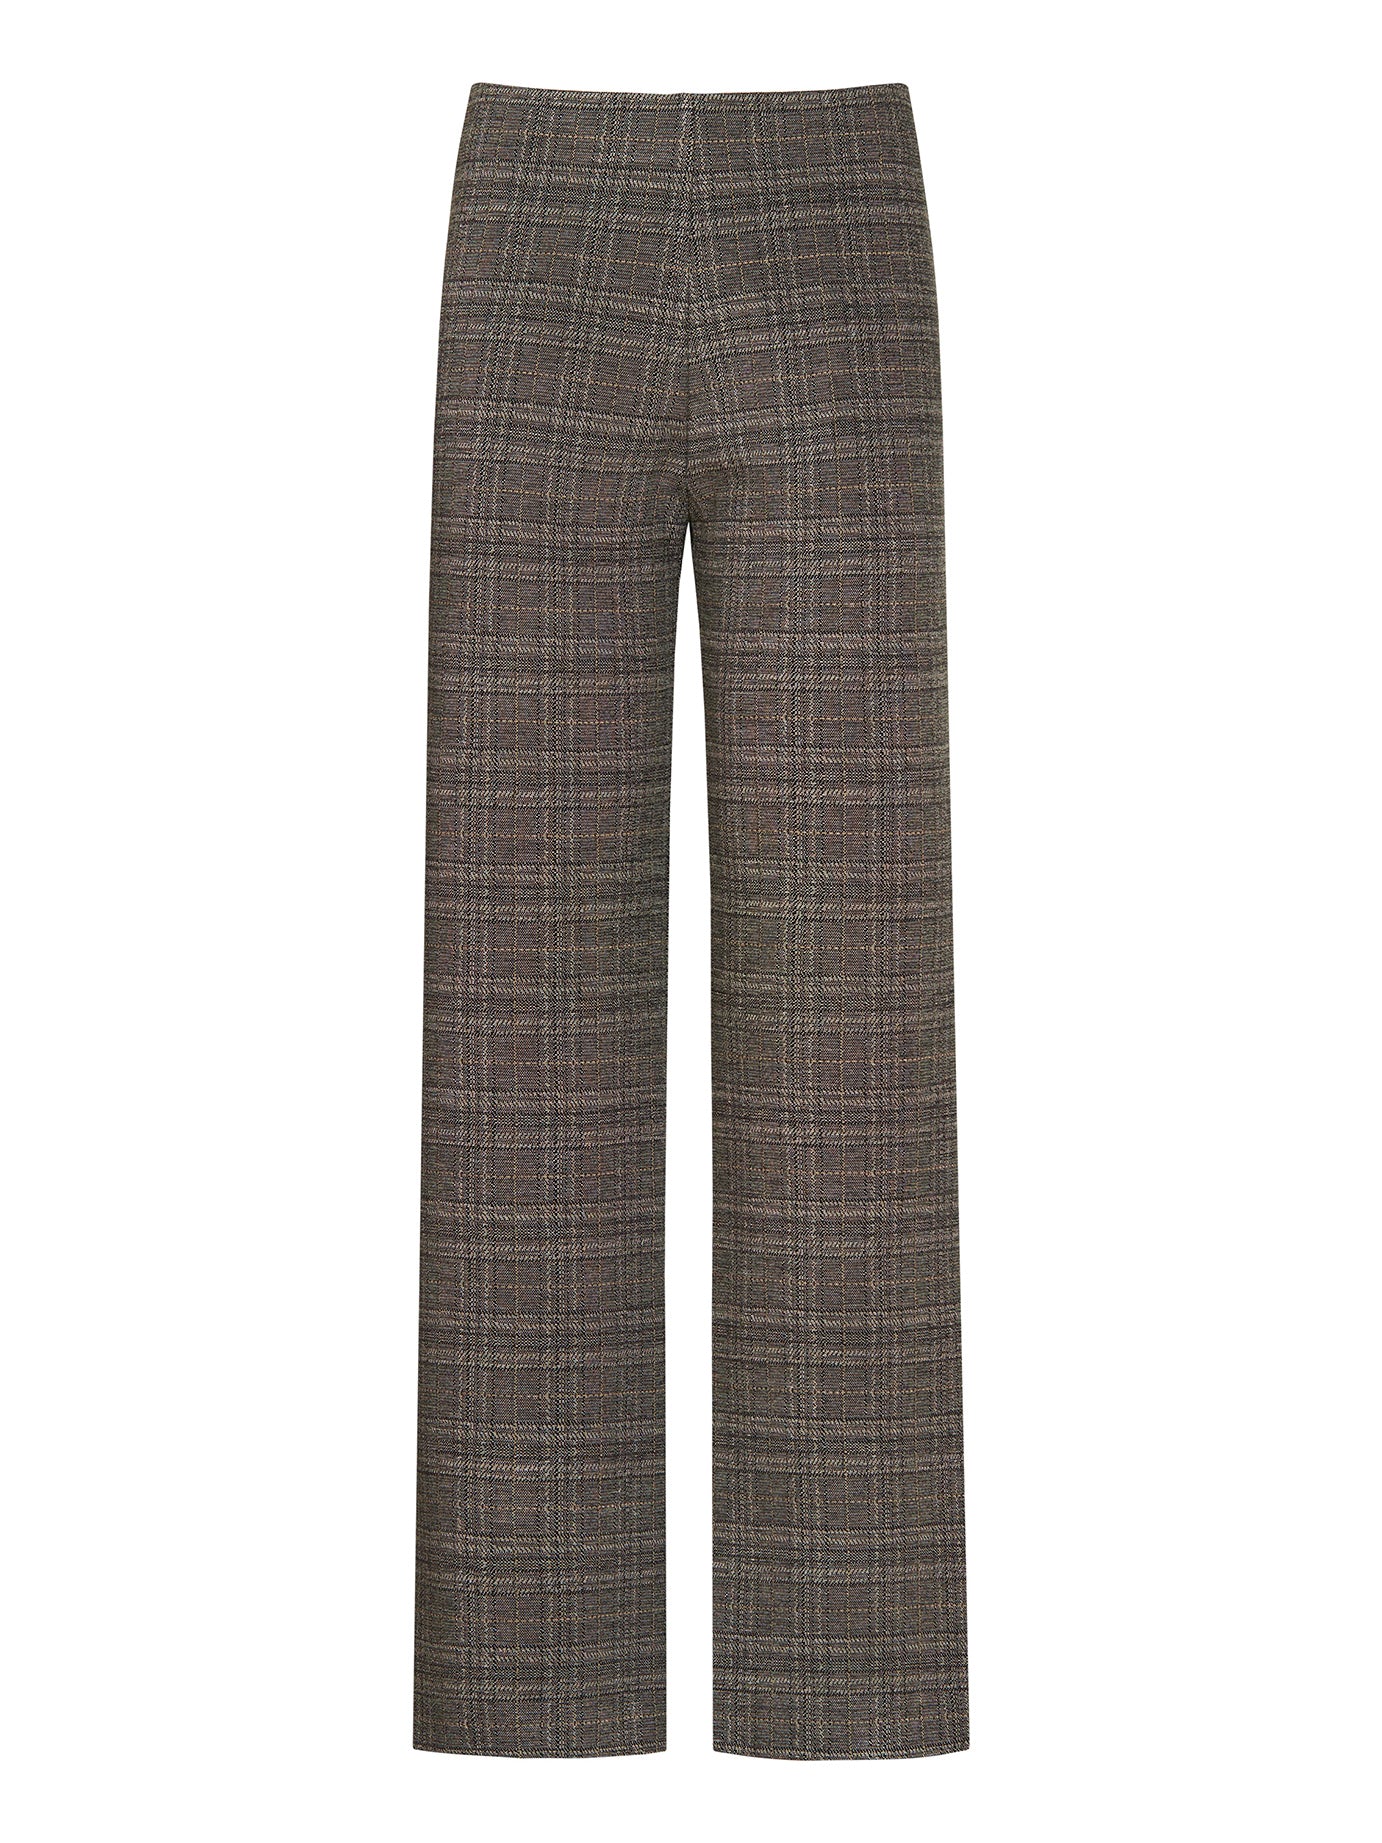 No Mans Land Trousers 60.268 6077 Dark Cocoa